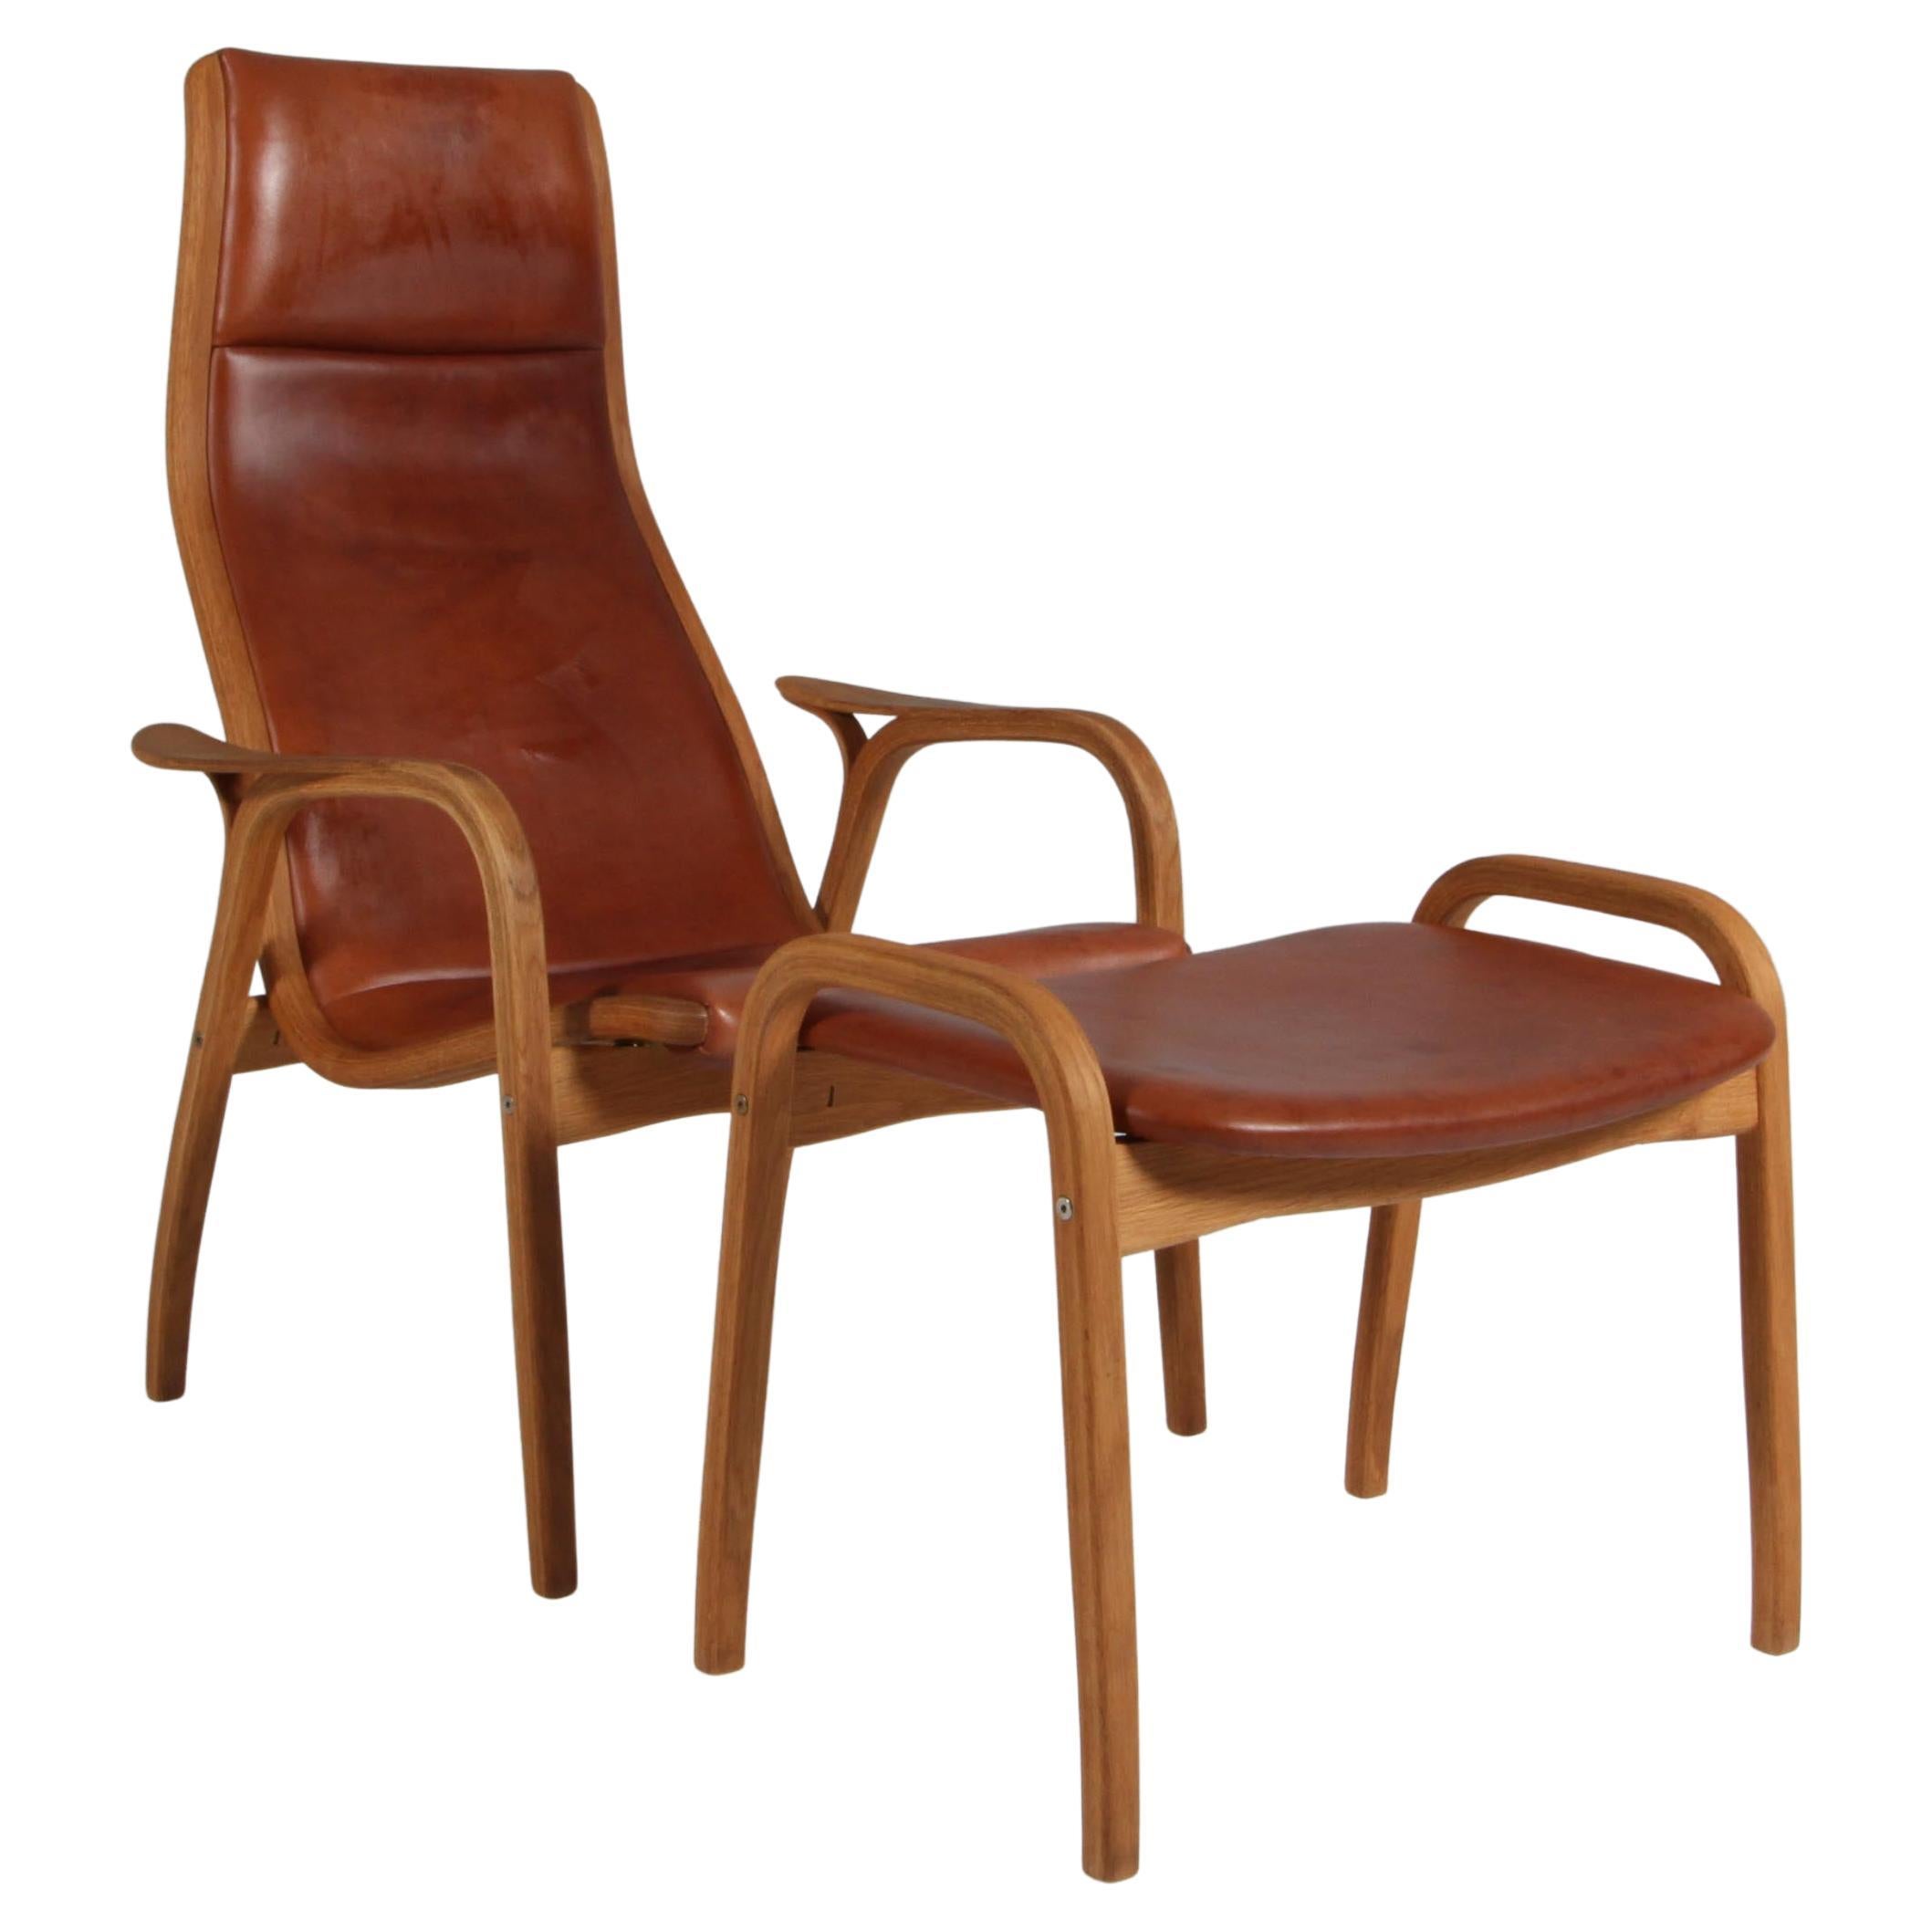 Yngve Ekström, "Lamino" Lounge Chair with ottoman, patinated leather For Sale